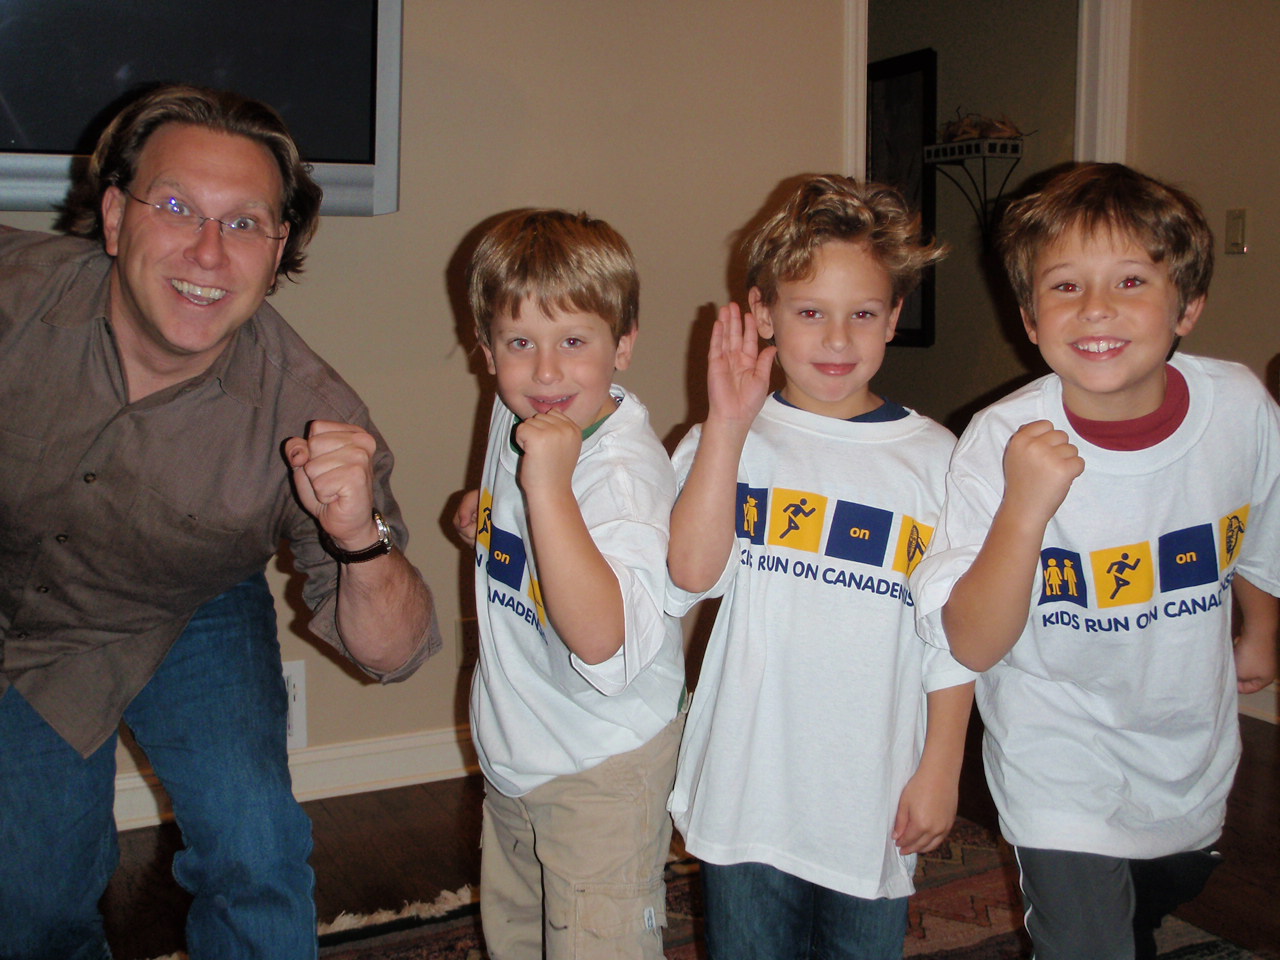 Me with the Minion brothers (from left to right): Josh, Dan and Zach.  Since the boys were wearing their "Kids Run on Canadensis" T-Shirts, we thought we'd pose accordingly.  